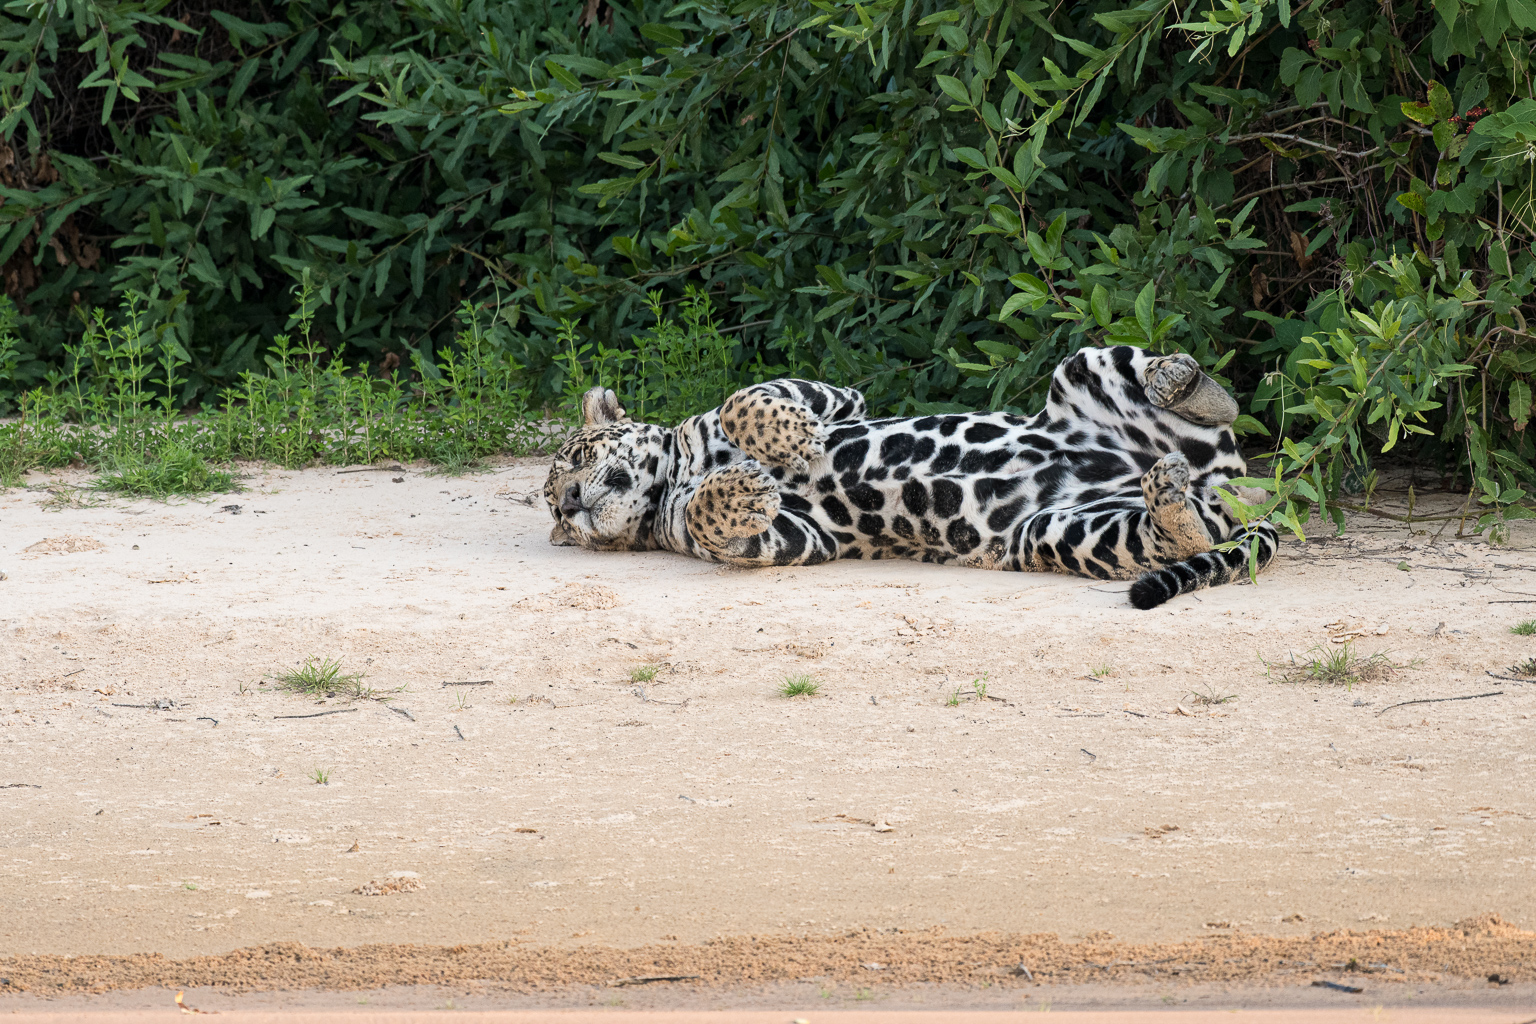 Jaguar laying on its back showing belly while lying on a beach. Taken in the Pantanal, Brazil by Ian Mears